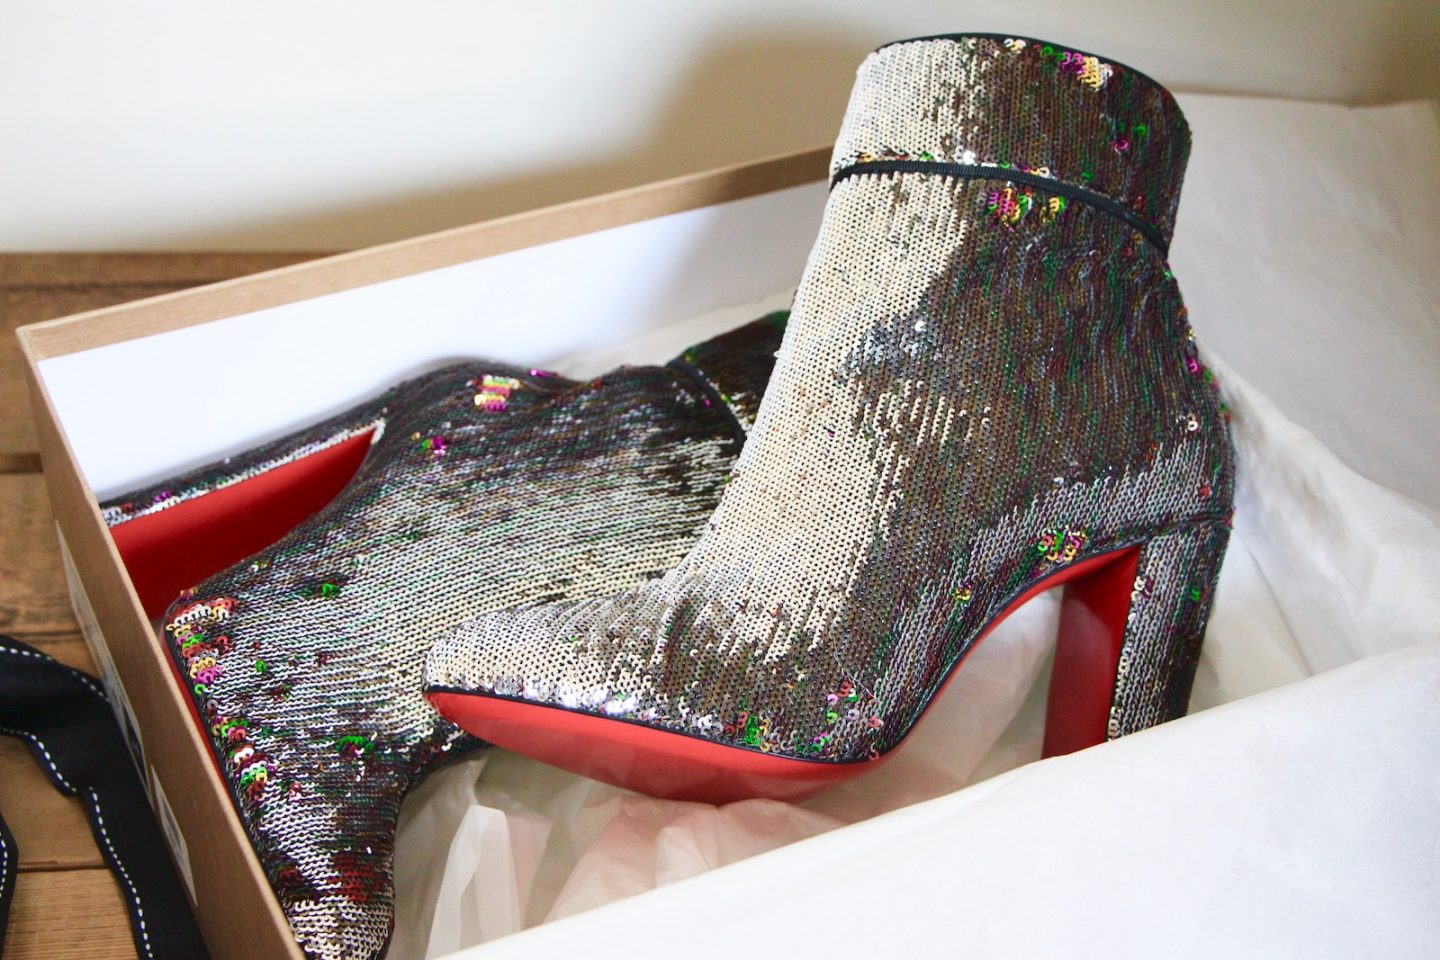 louboutin sparkly boots